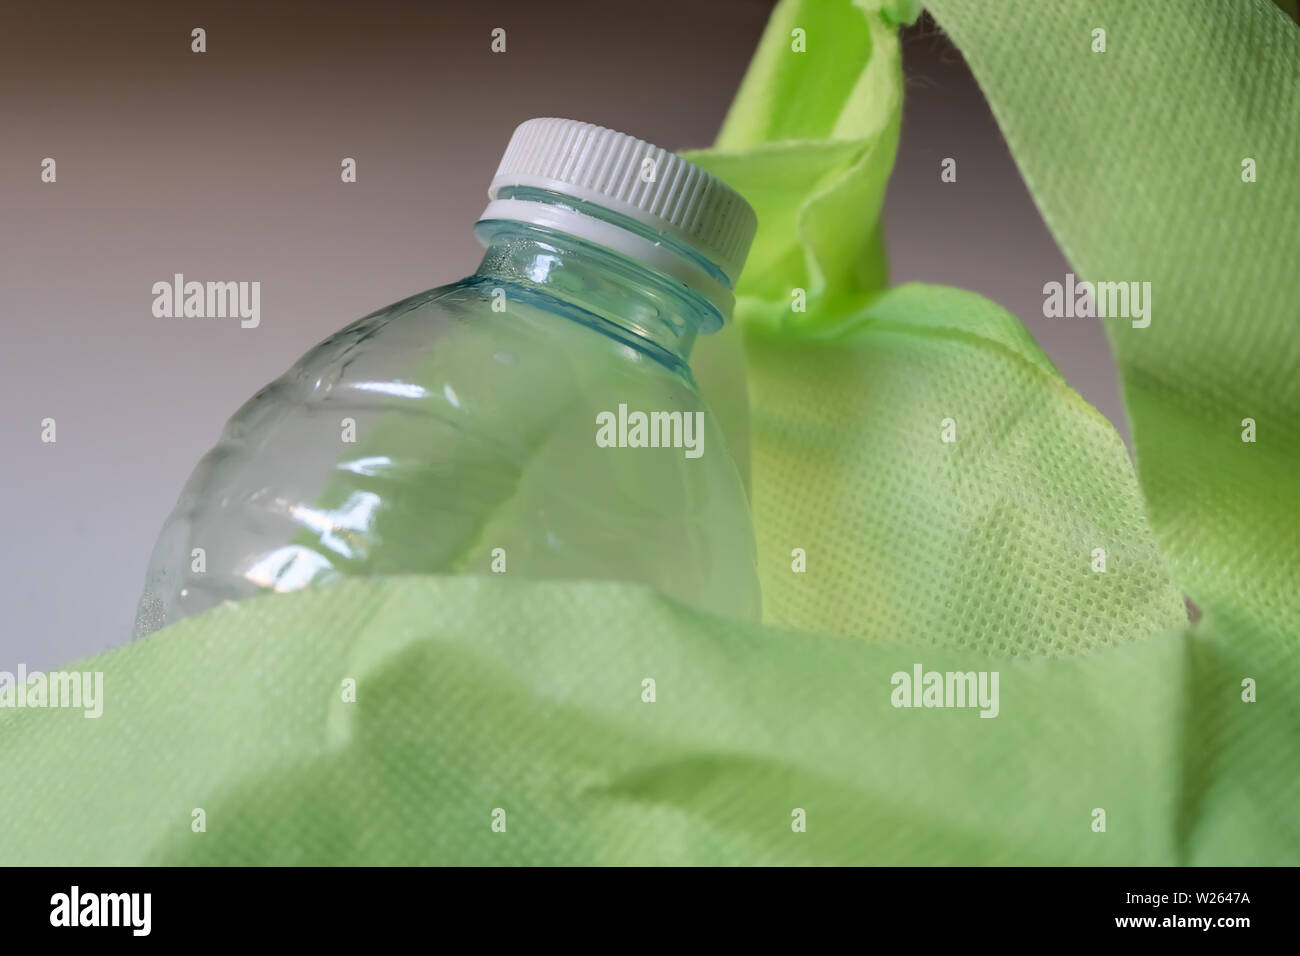 Plastic bottle with the cap inside the reusable green shopping bag closeup - Image Stock Photo